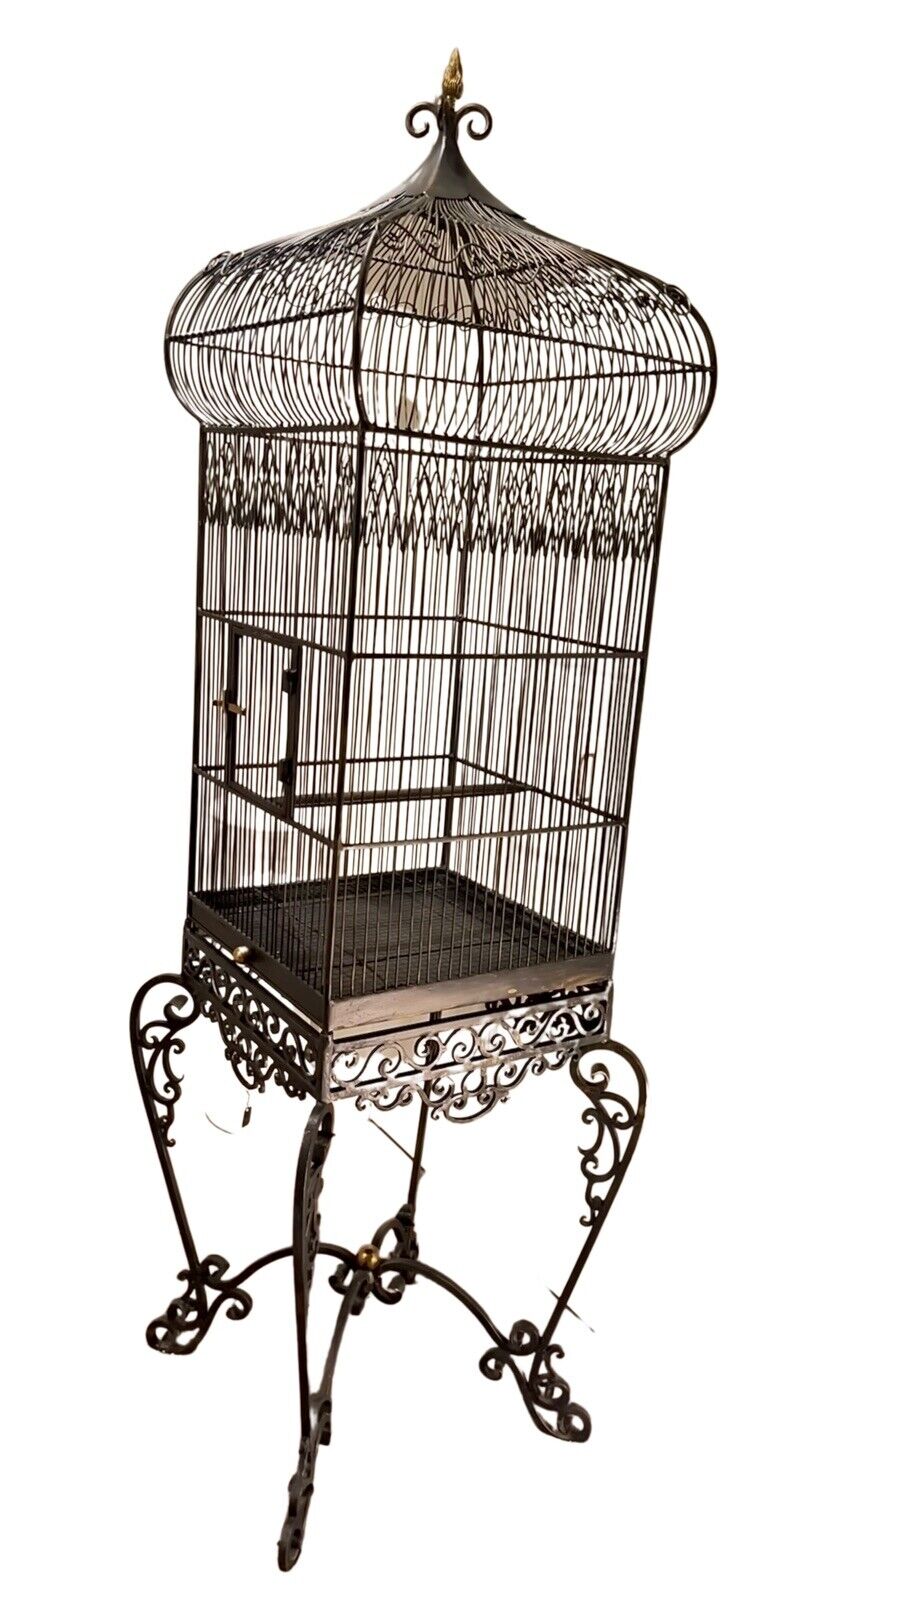 Majestic HEAVY Victorian Wrought Iron Birdcage By MAITLAND SMITH - 73”X21”X18”